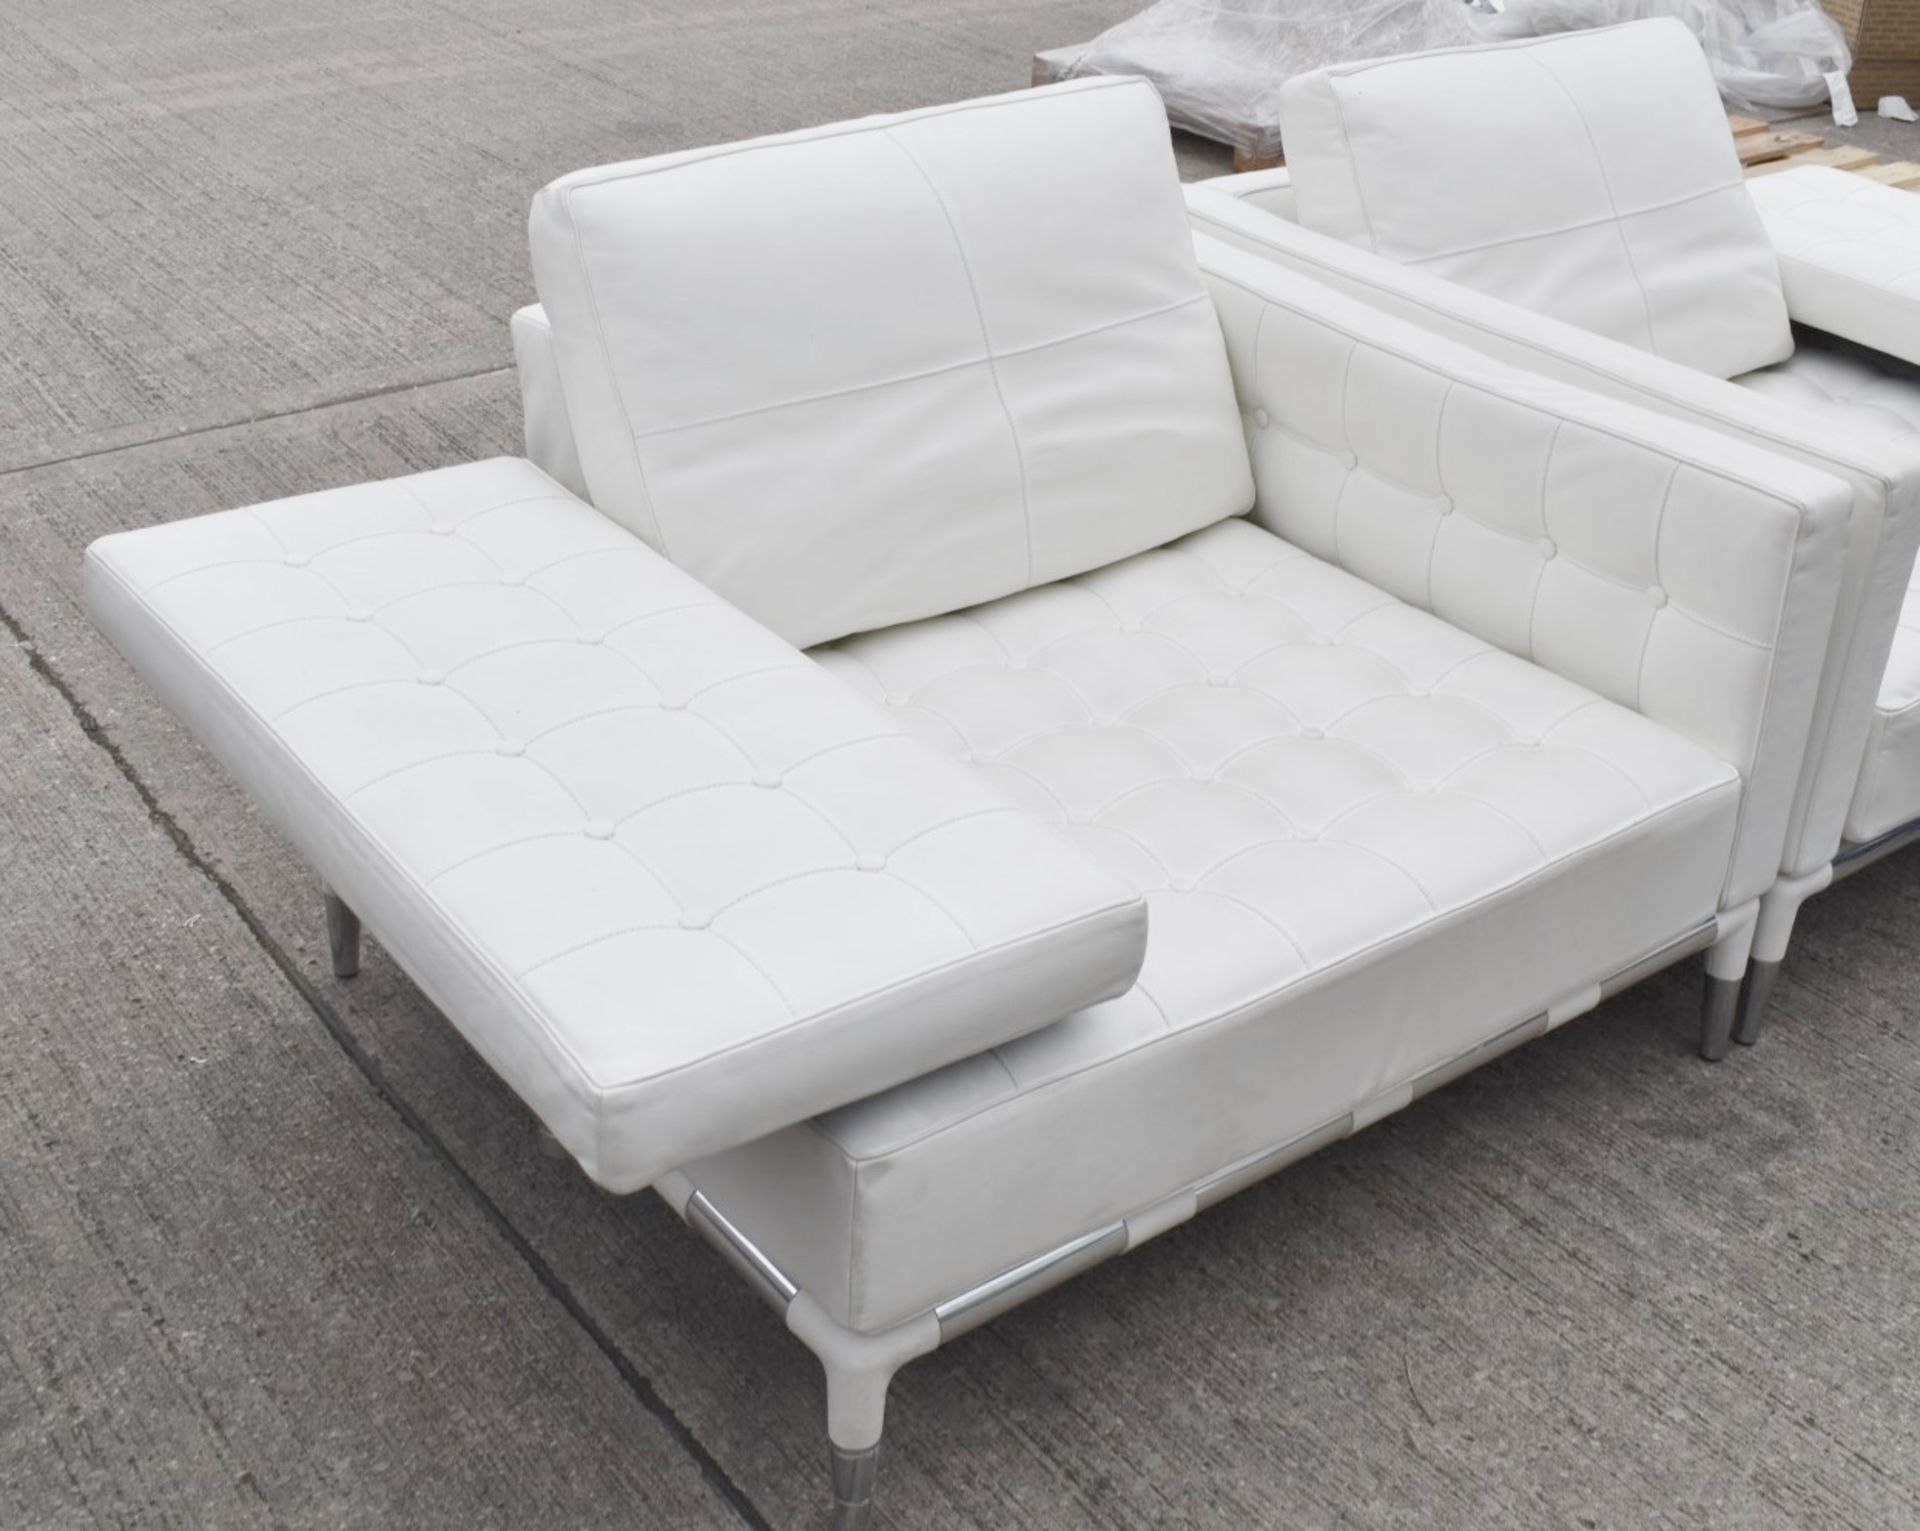 Pair Of CASSINA PRIVÉ / PHILIPPE STARCK Style Designer White Leather Lounge Chairs - Original Price - Image 2 of 10